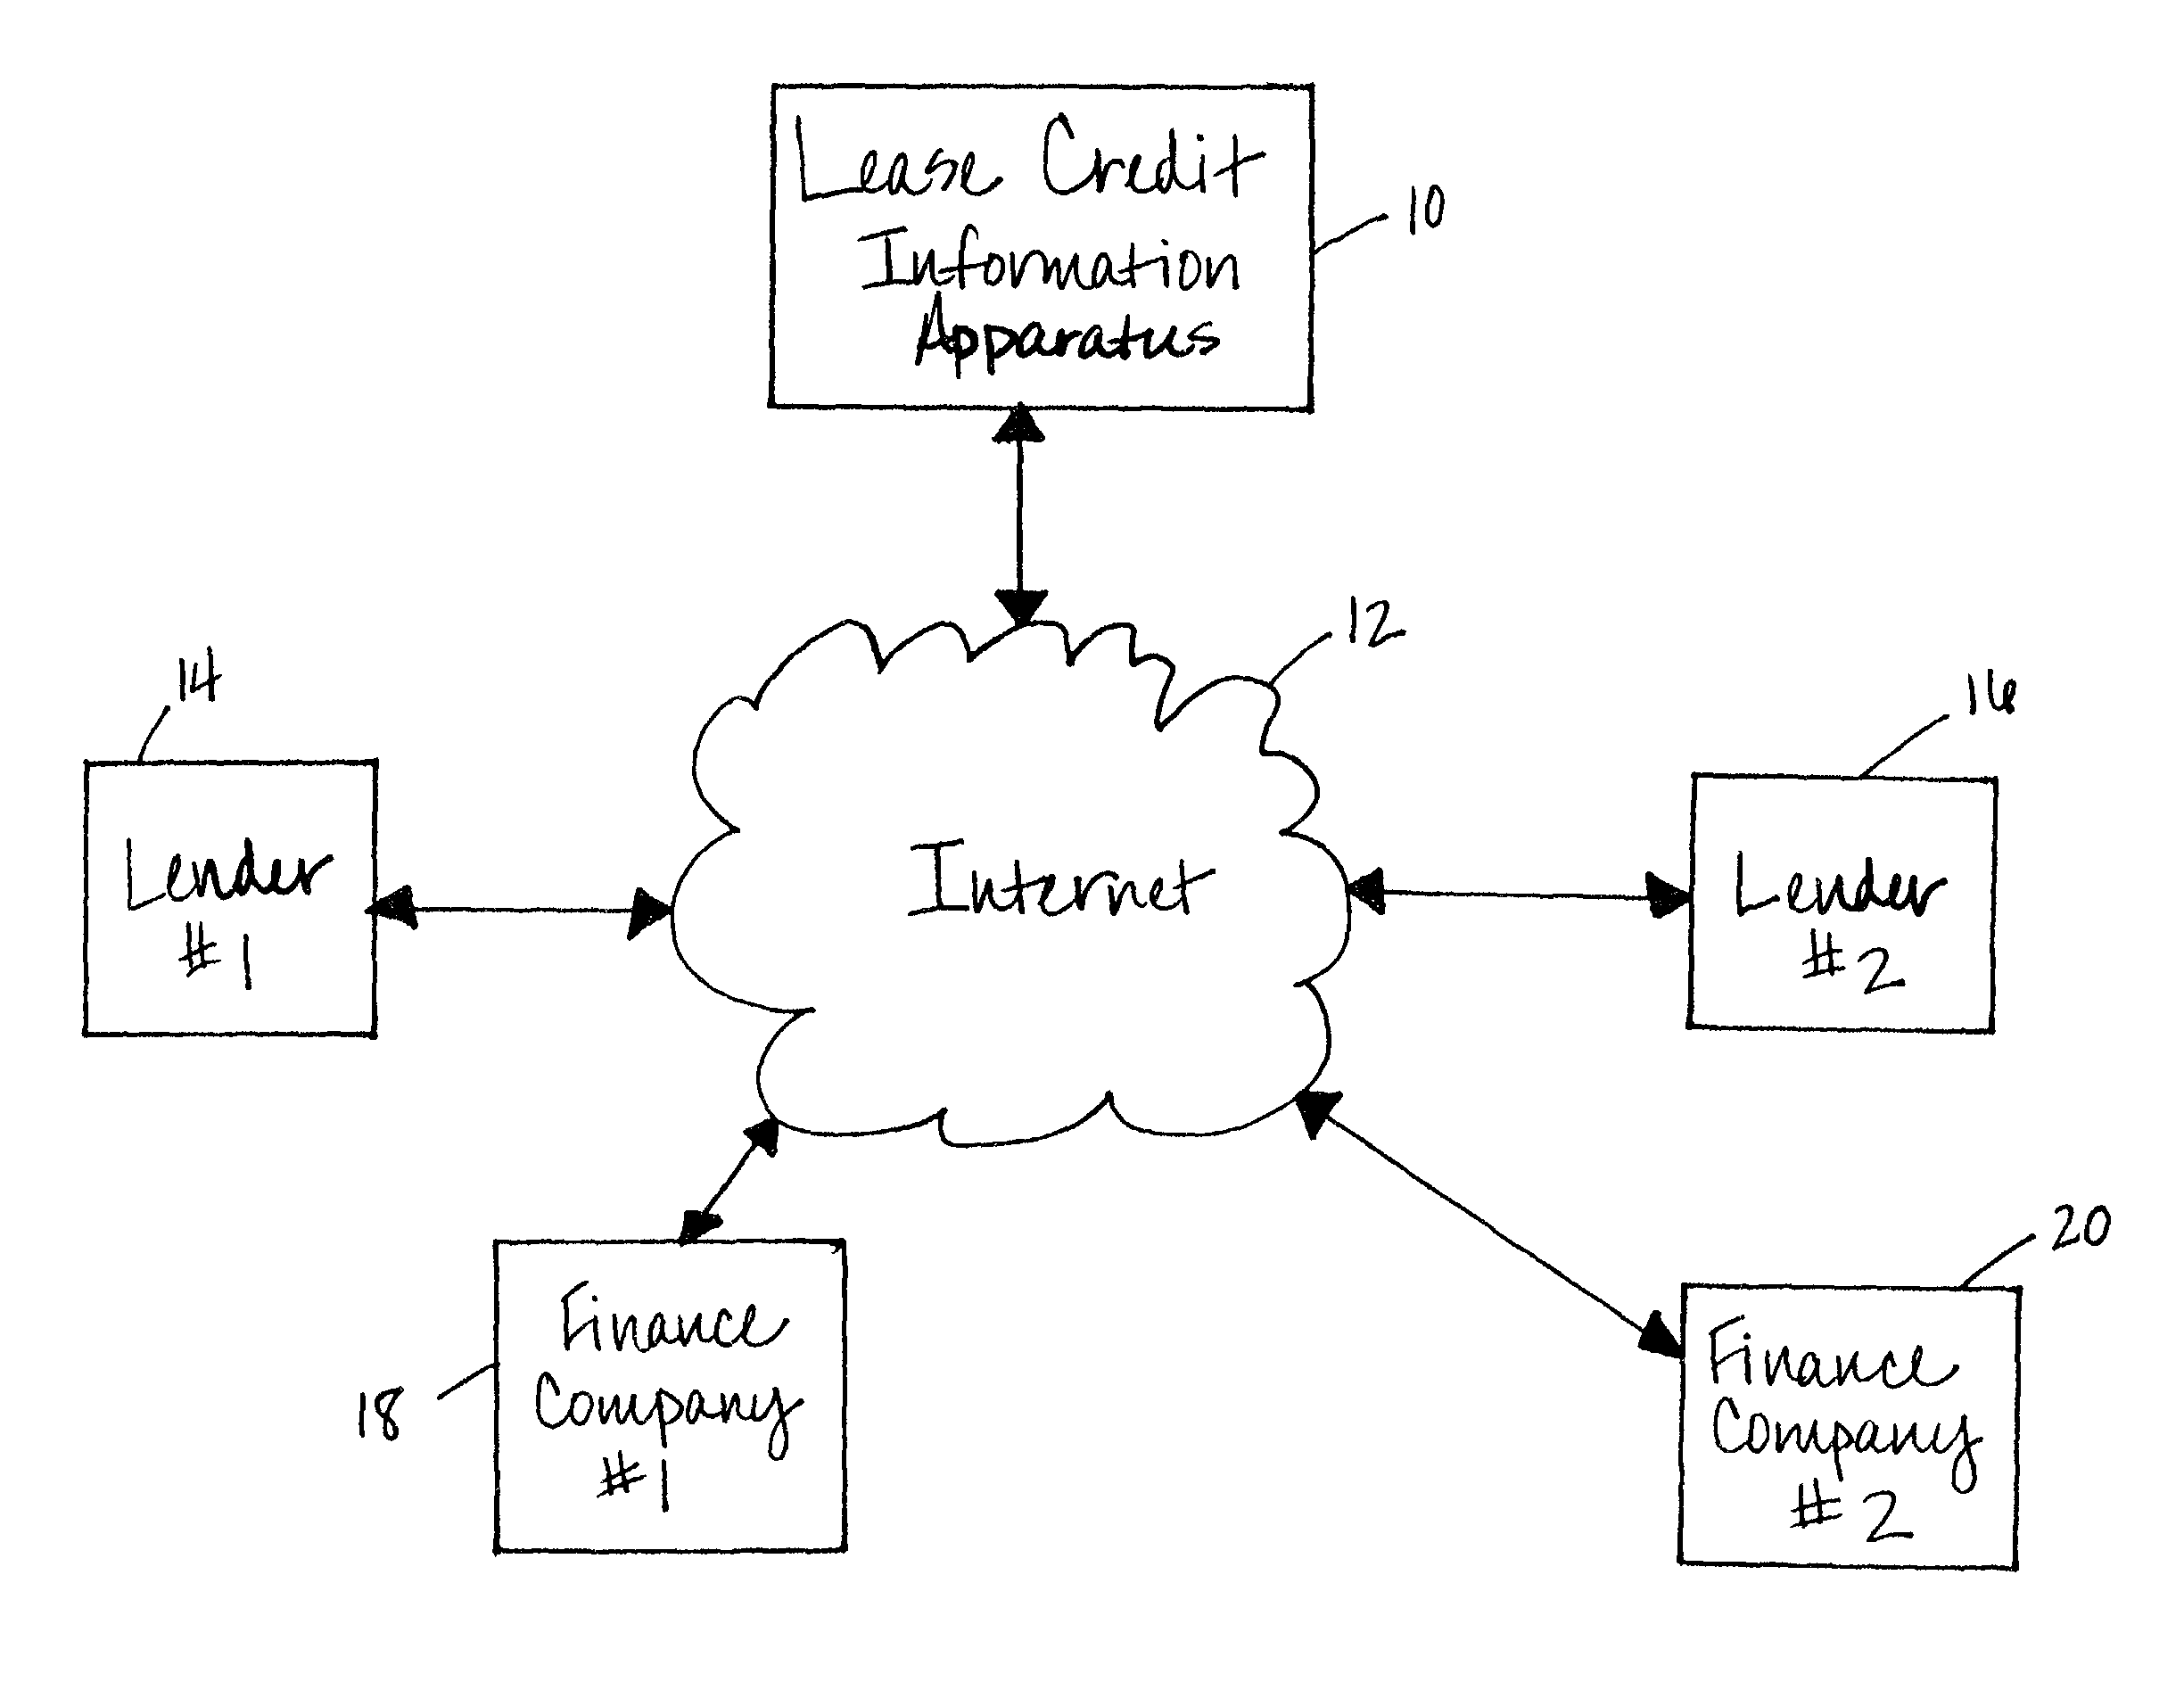 Methods and apparatus for automatically exchanging credit information